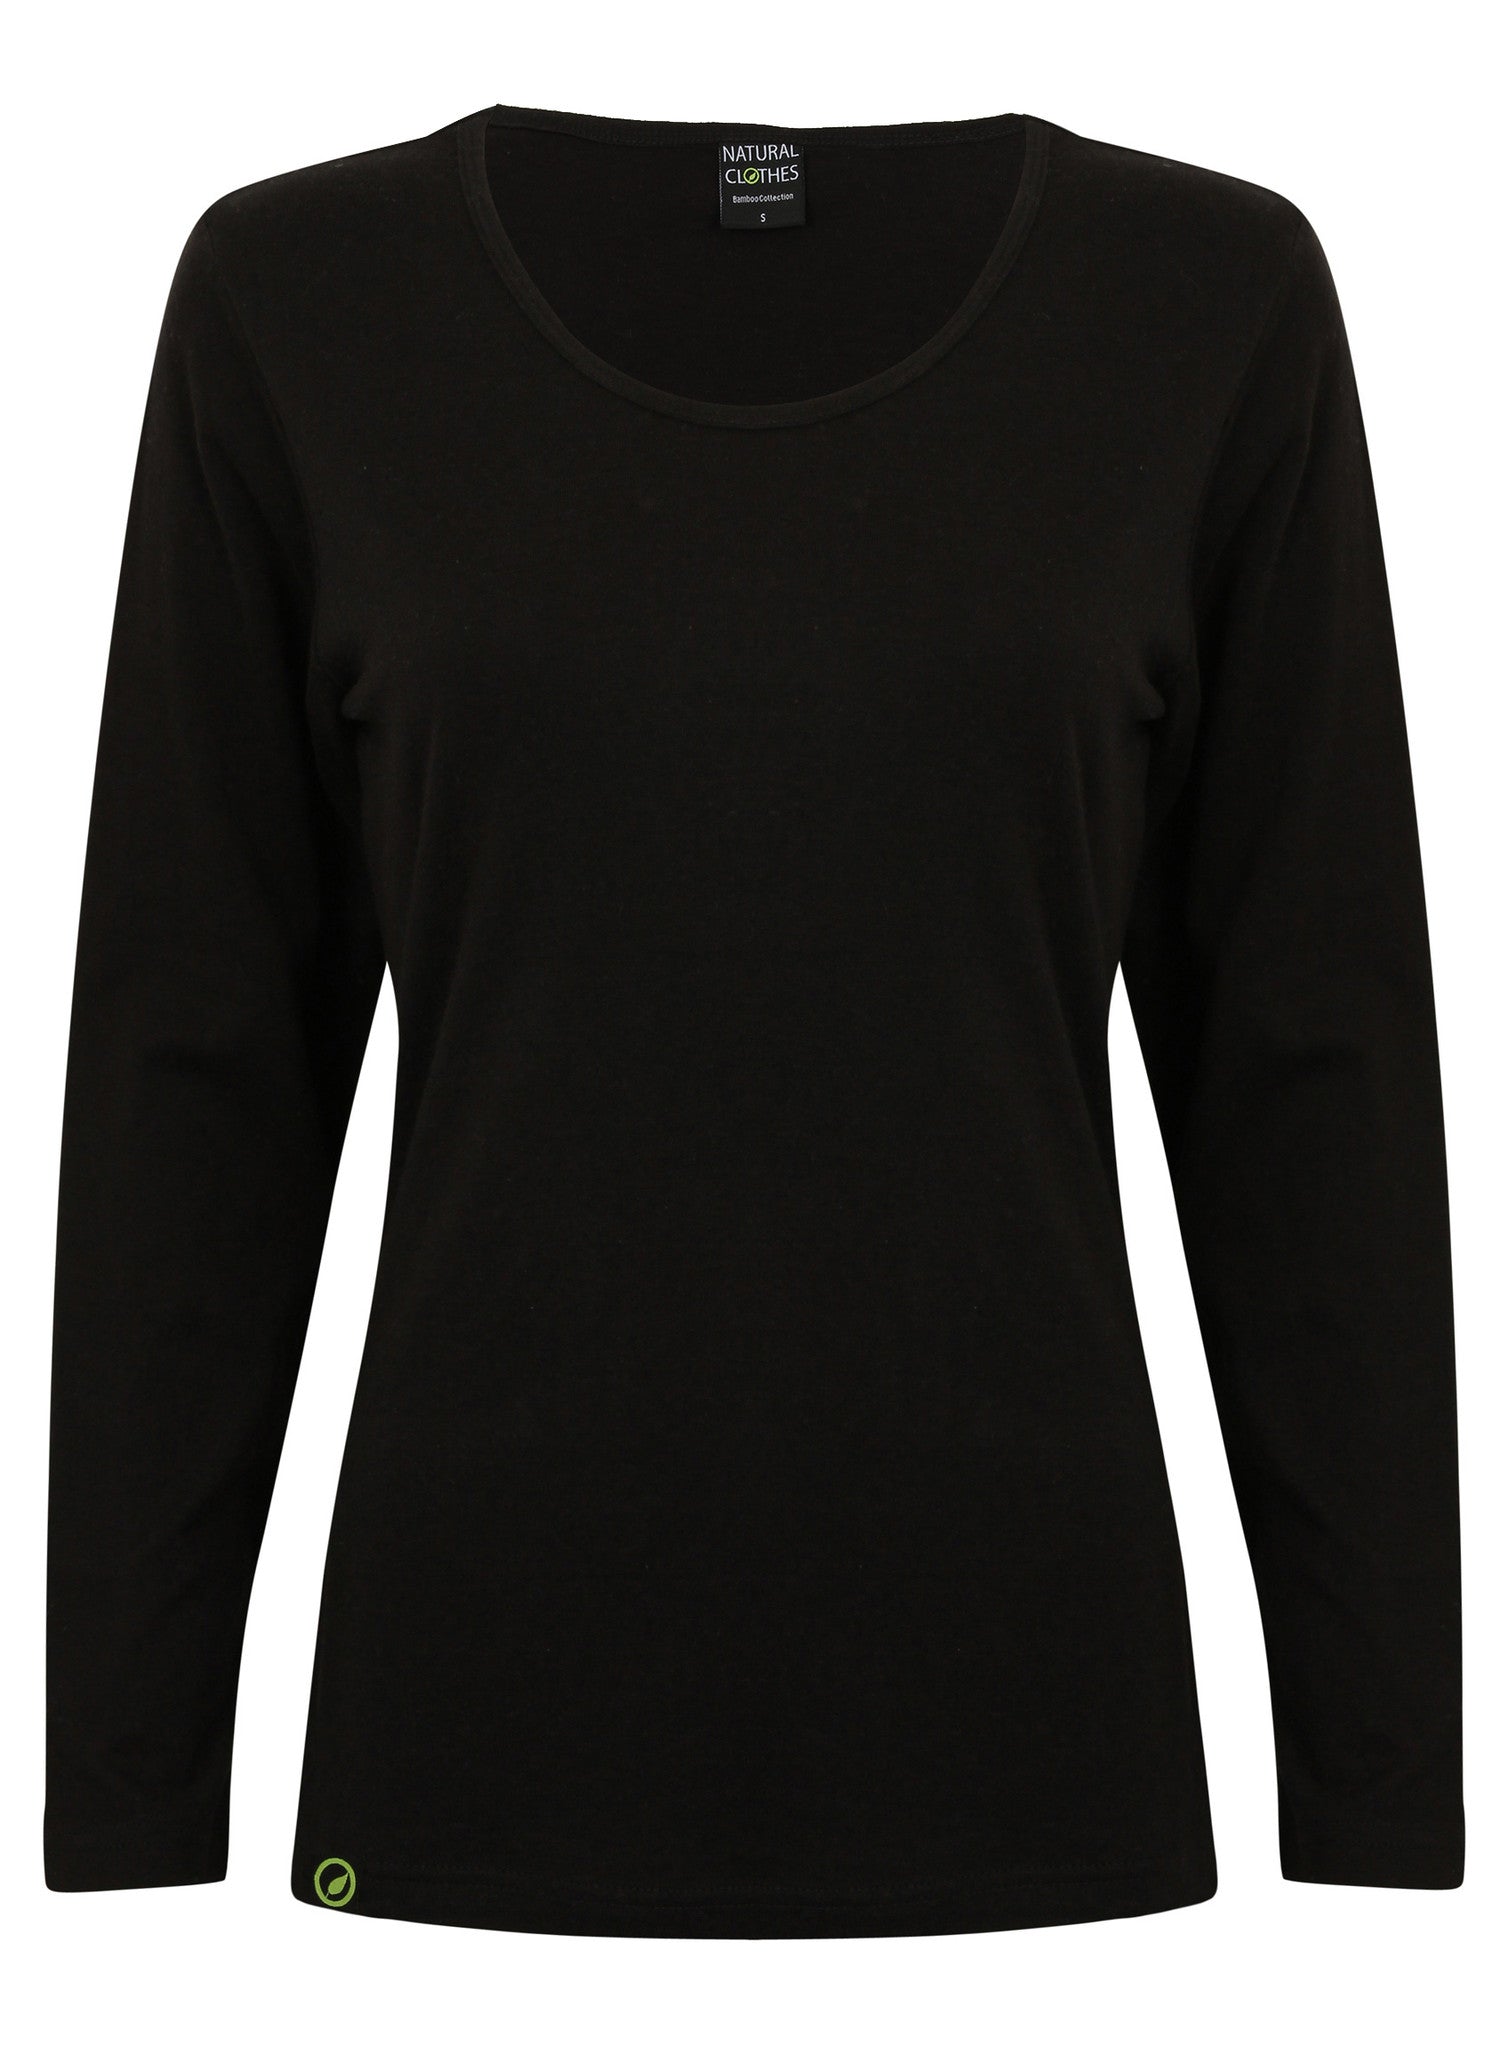 Bamboo Long Sleeve Top Black - Natural Clothes Bamboo Clothing & Accessories for Men & Women 